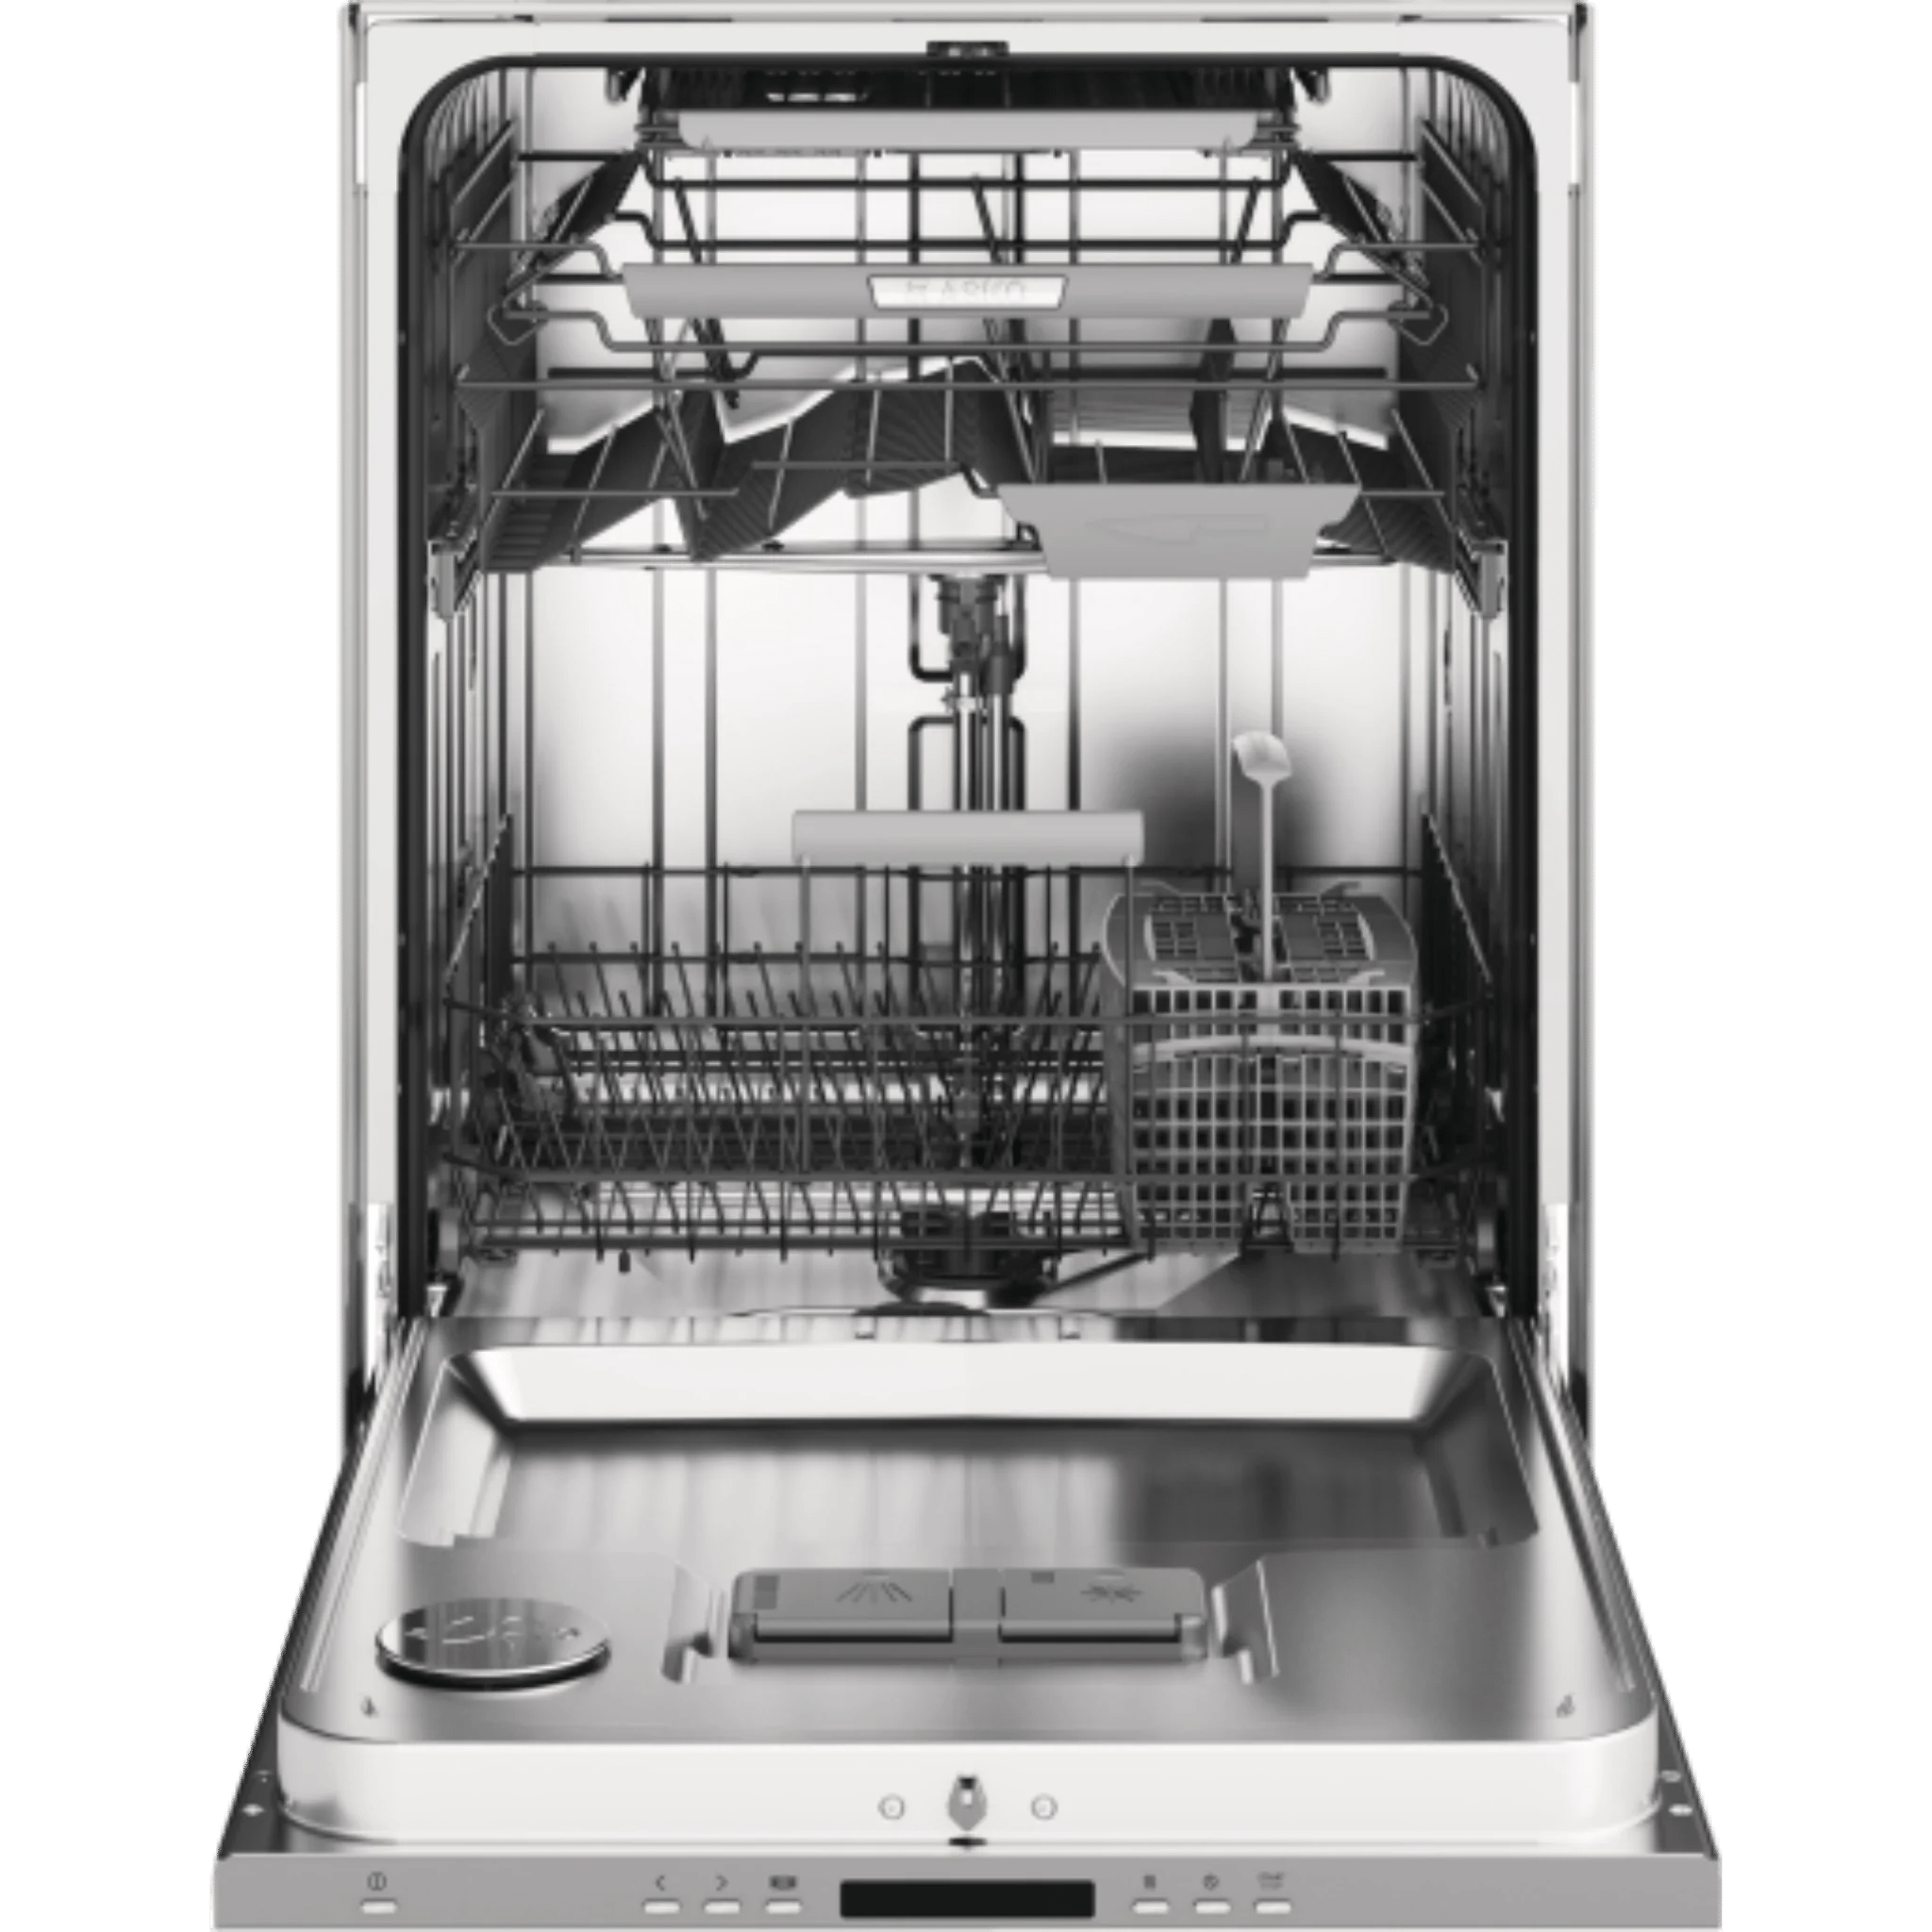 Asko 30 Series 24 Inch Wide 16 Place Setting Energy Star Rated Built-In Top Control Dishwasher with Condensation Drying and Pro Handle Dishwashers DBI663PHS Luxury Appliances Direct